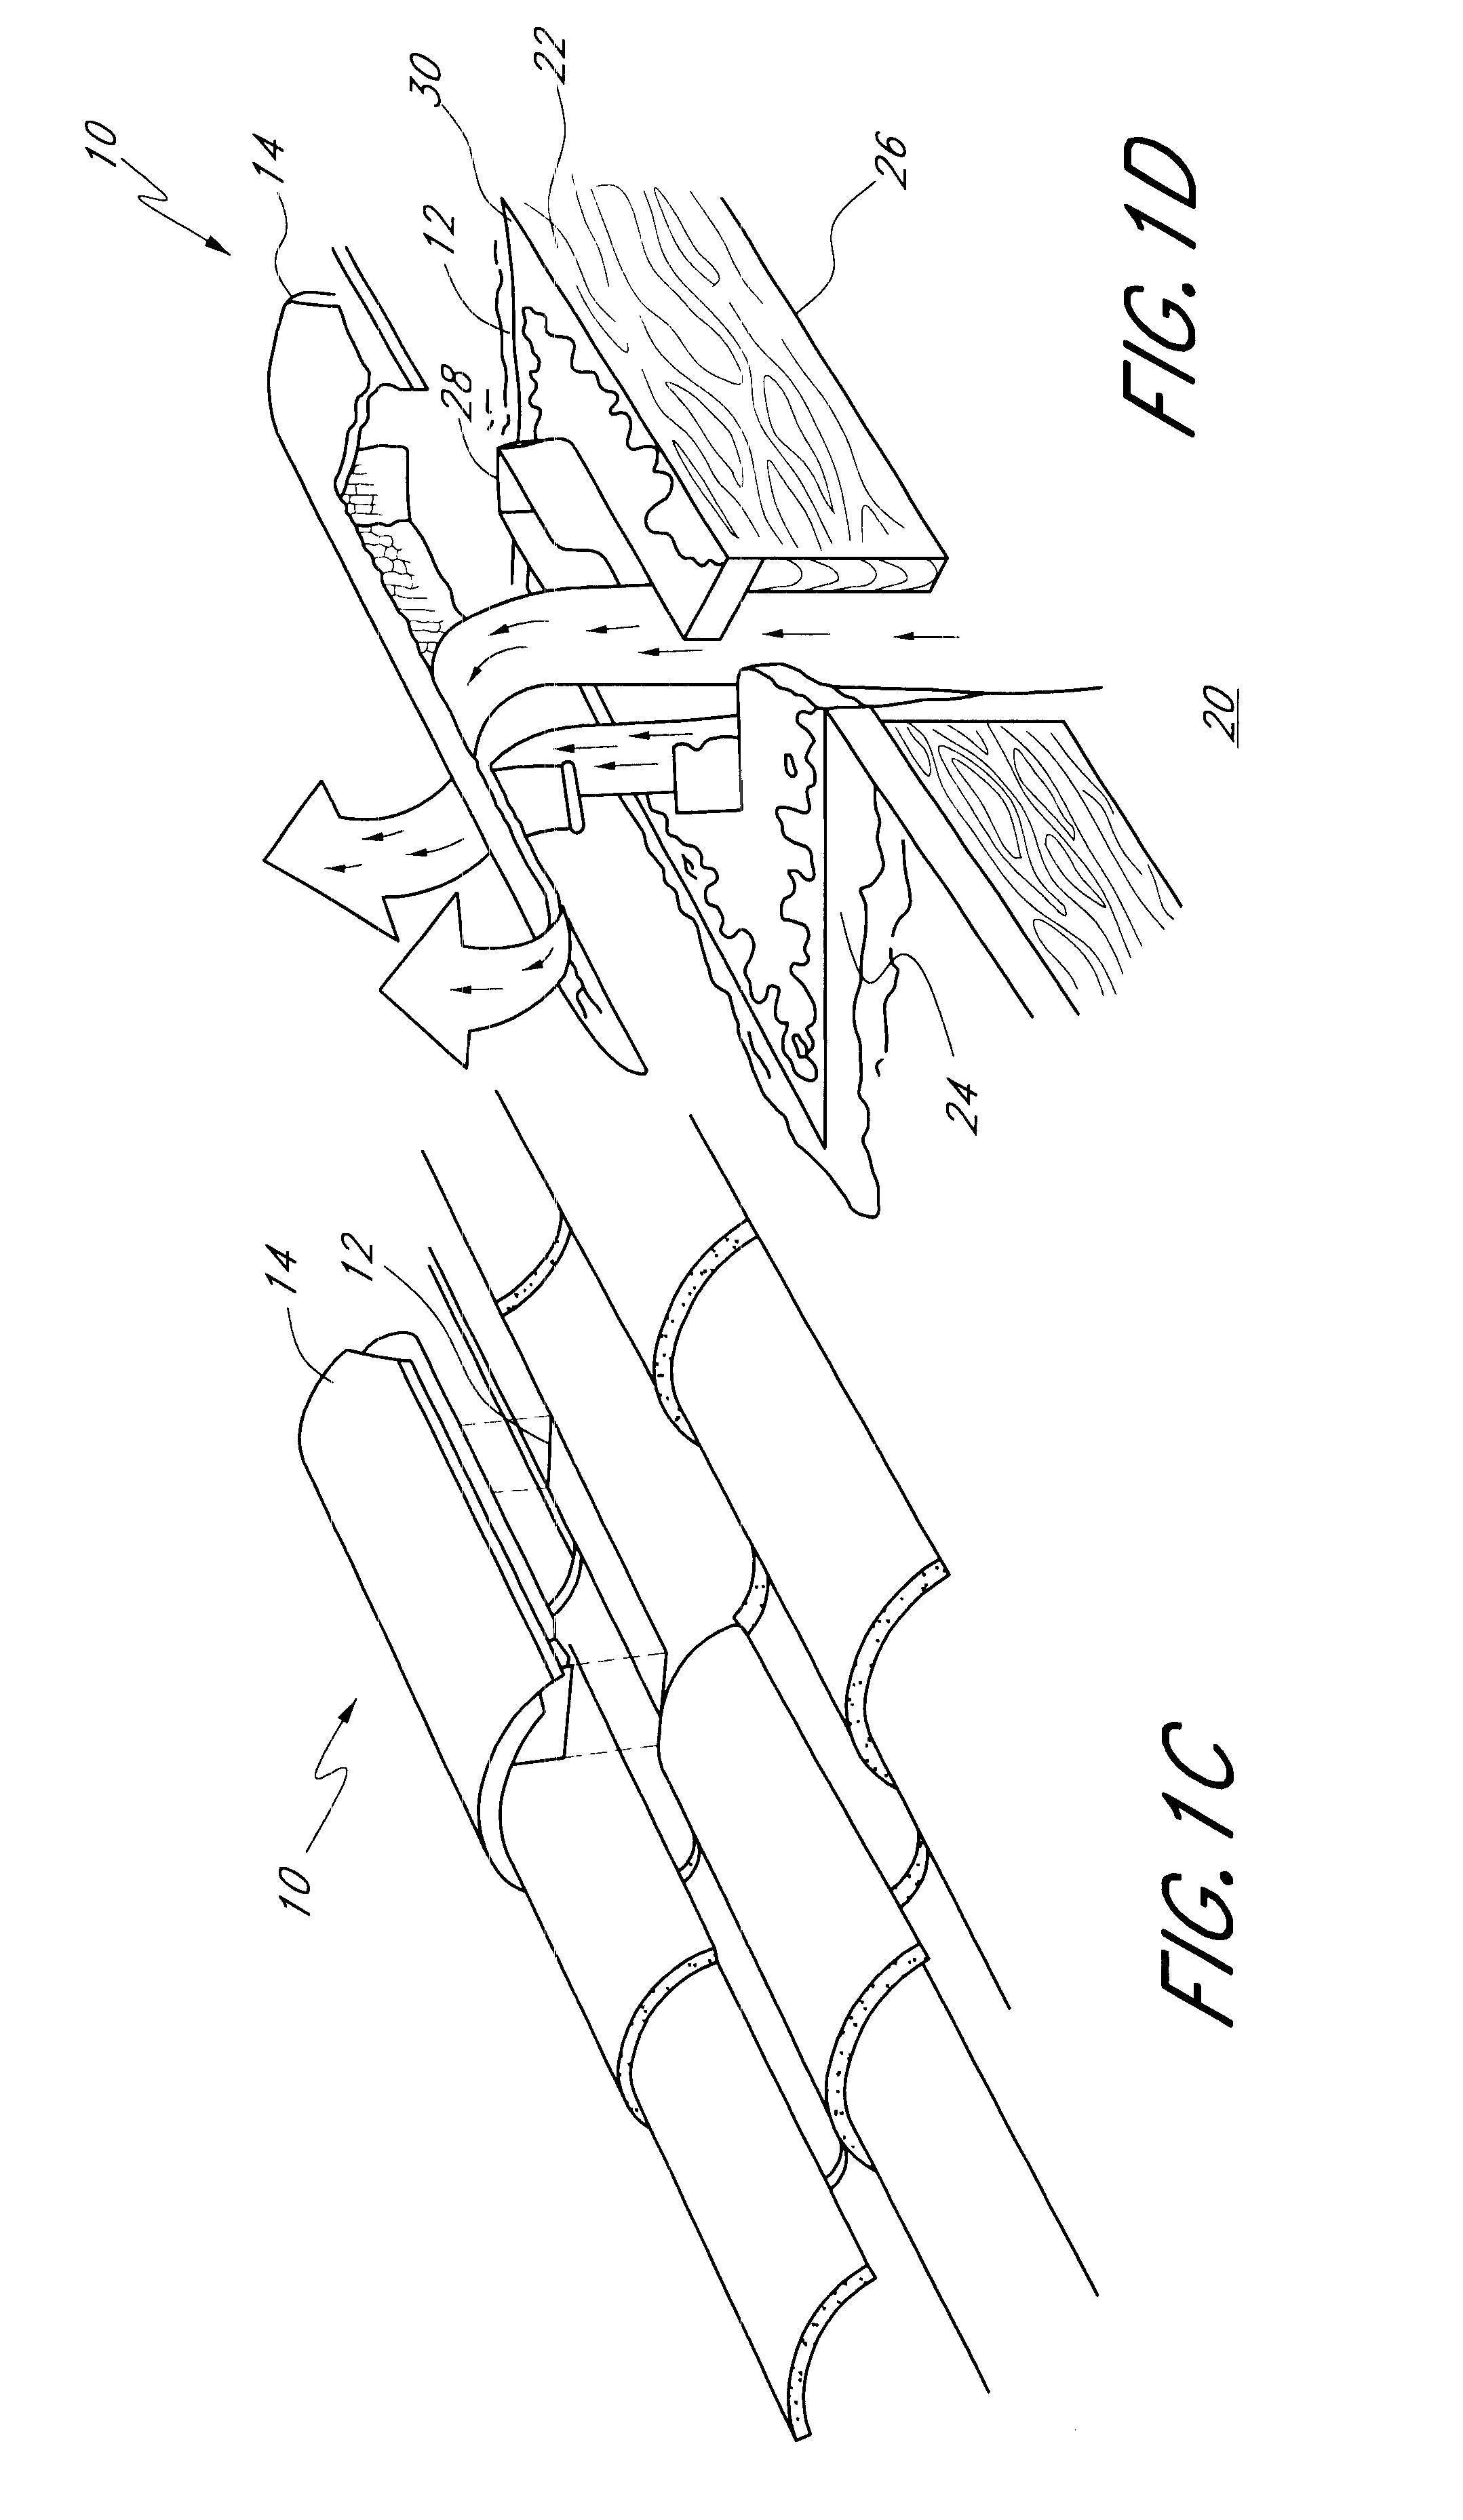 Method and apparatus for roof ventilation